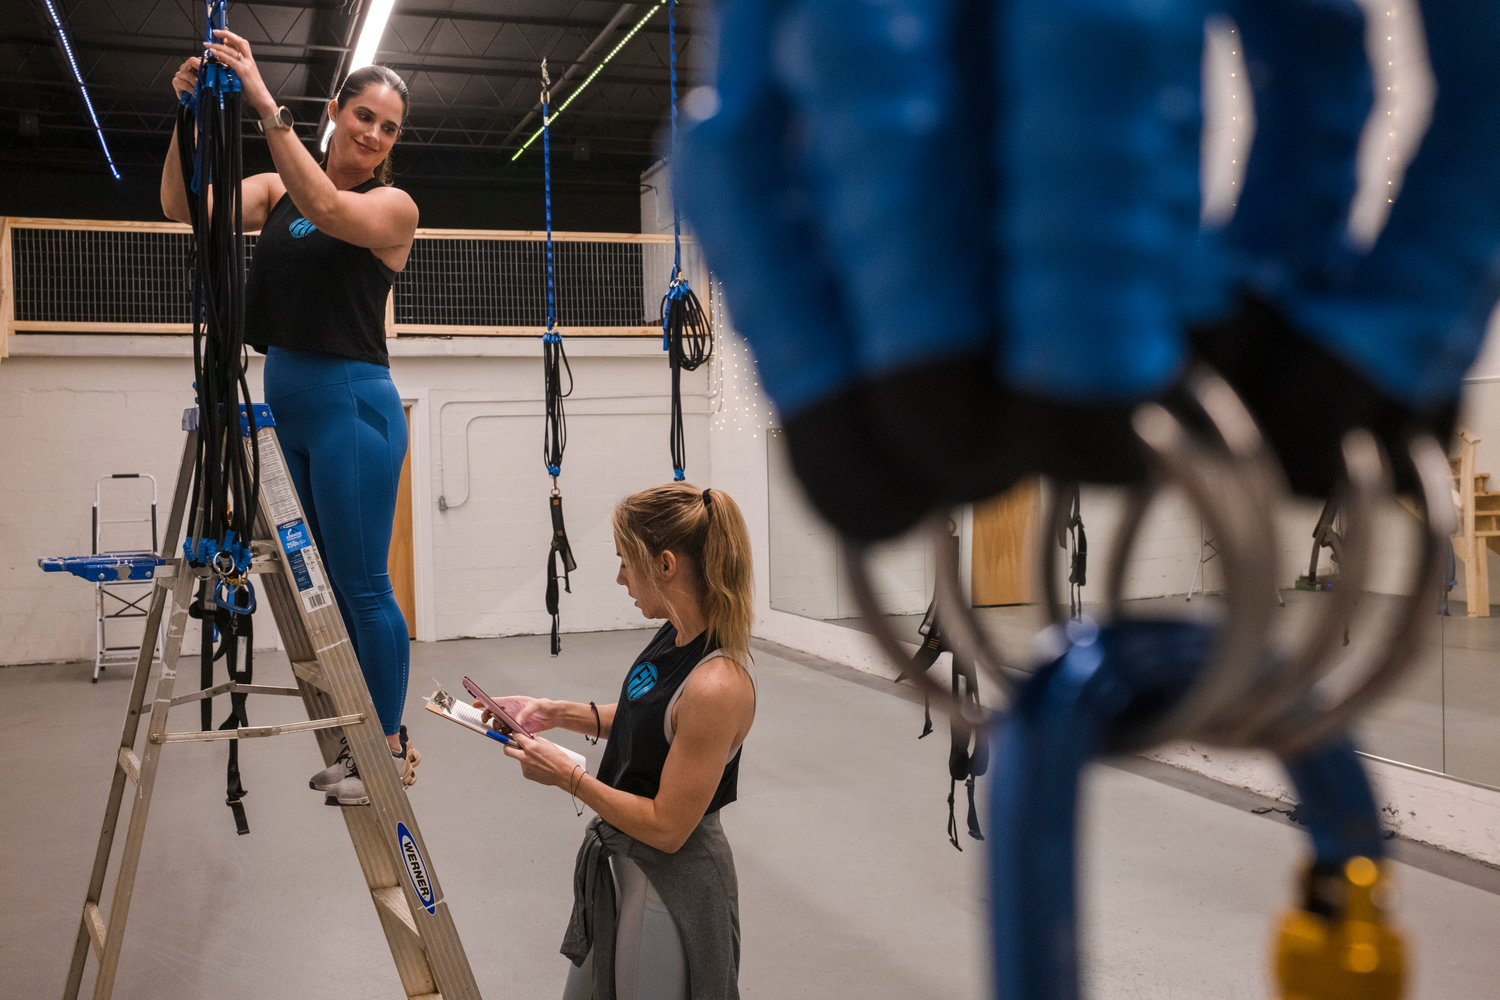 Lauren Babcock and Jessica Watkins prepare the equipment before a Sling Bungee workout.